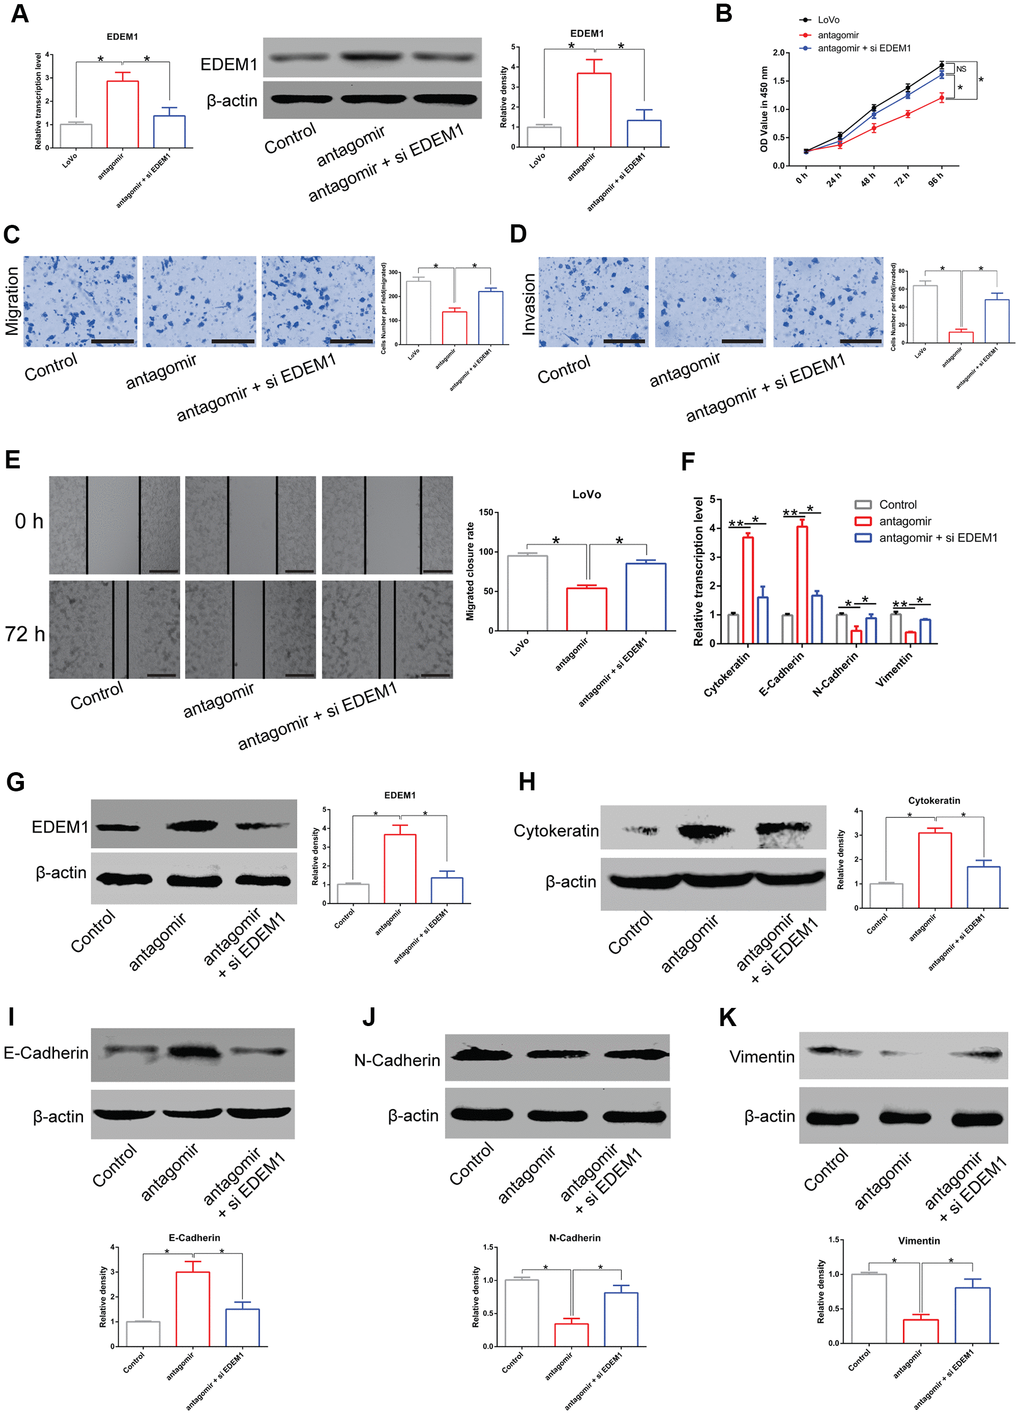 LINC00485/miR-581/EDEM1 axis regulates epithelial to mesenchymal transition in CRC cells. (A) The expression of EDEM1 in LoVo cells transfected with miR-581 antagomir or in combination with siEDEM1. (B) Cell viability of LoVo cells transfected with miR-581 antagomir or in combination with siEDEM1 measured by the CCK-8 assay. (C–E) The (C, E) migratory and (D) invasive capabilities of LoVo cells transfected with miR-581 antagomir or co-transfected with miR-581 antagomir and siEDEM1 were assessed by Transwell migration and invasion assays and the in vitro scratch assay. (F) The mRNA levels of cytokeratin, E-cadherin, N-cadherin, and vimentin in LoVo cells transfected with miR-581 antagomir or in combination with siEDEM1 were measured by RT-qPCR. (G–K) The protein levels of (C) EDEM1, (D) Cytokeratin, (E) E-cadherin, (F) N-cadherin and (G) Vimentin in LoVo cells transfected with miR-581 antagomir or in combination with siEDEM1 were quantified by western blotting assay. Data were analyzed using one-way ANOVA with LSD test. Bars were represented as S.D. *PP